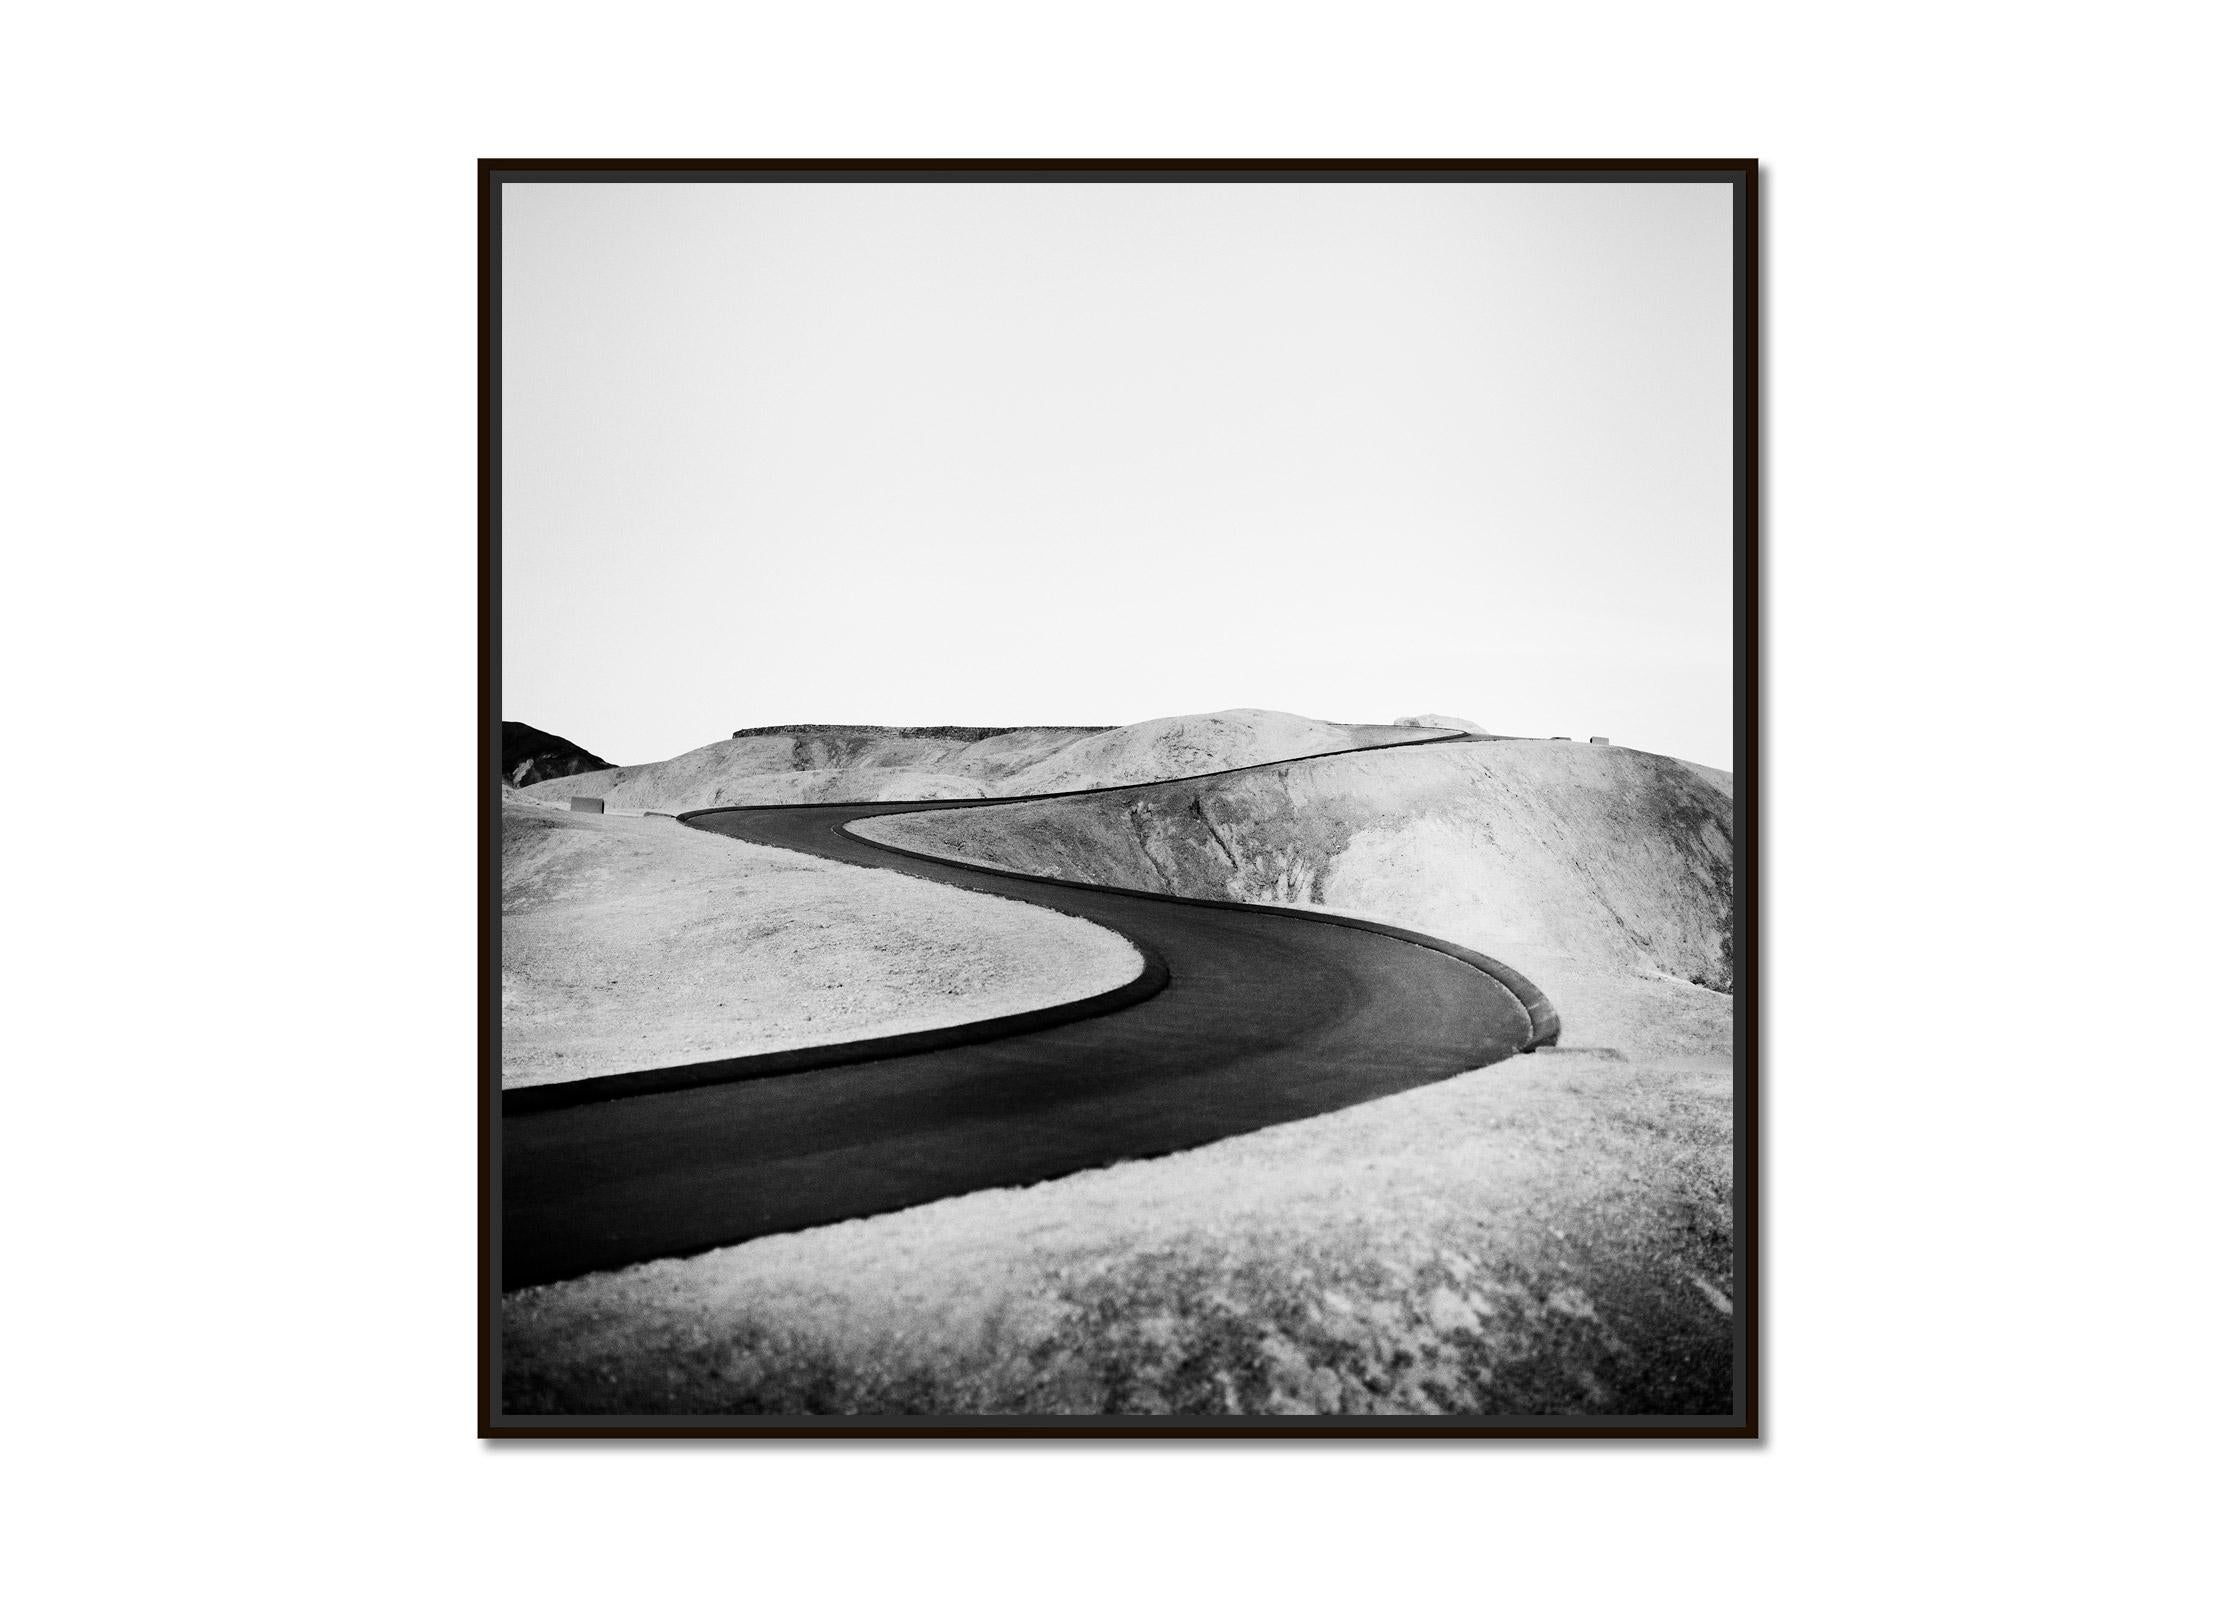 S Curve Shaped Road, Death Valley, California, USA, black and white landscape - Photograph by Gerald Berghammer